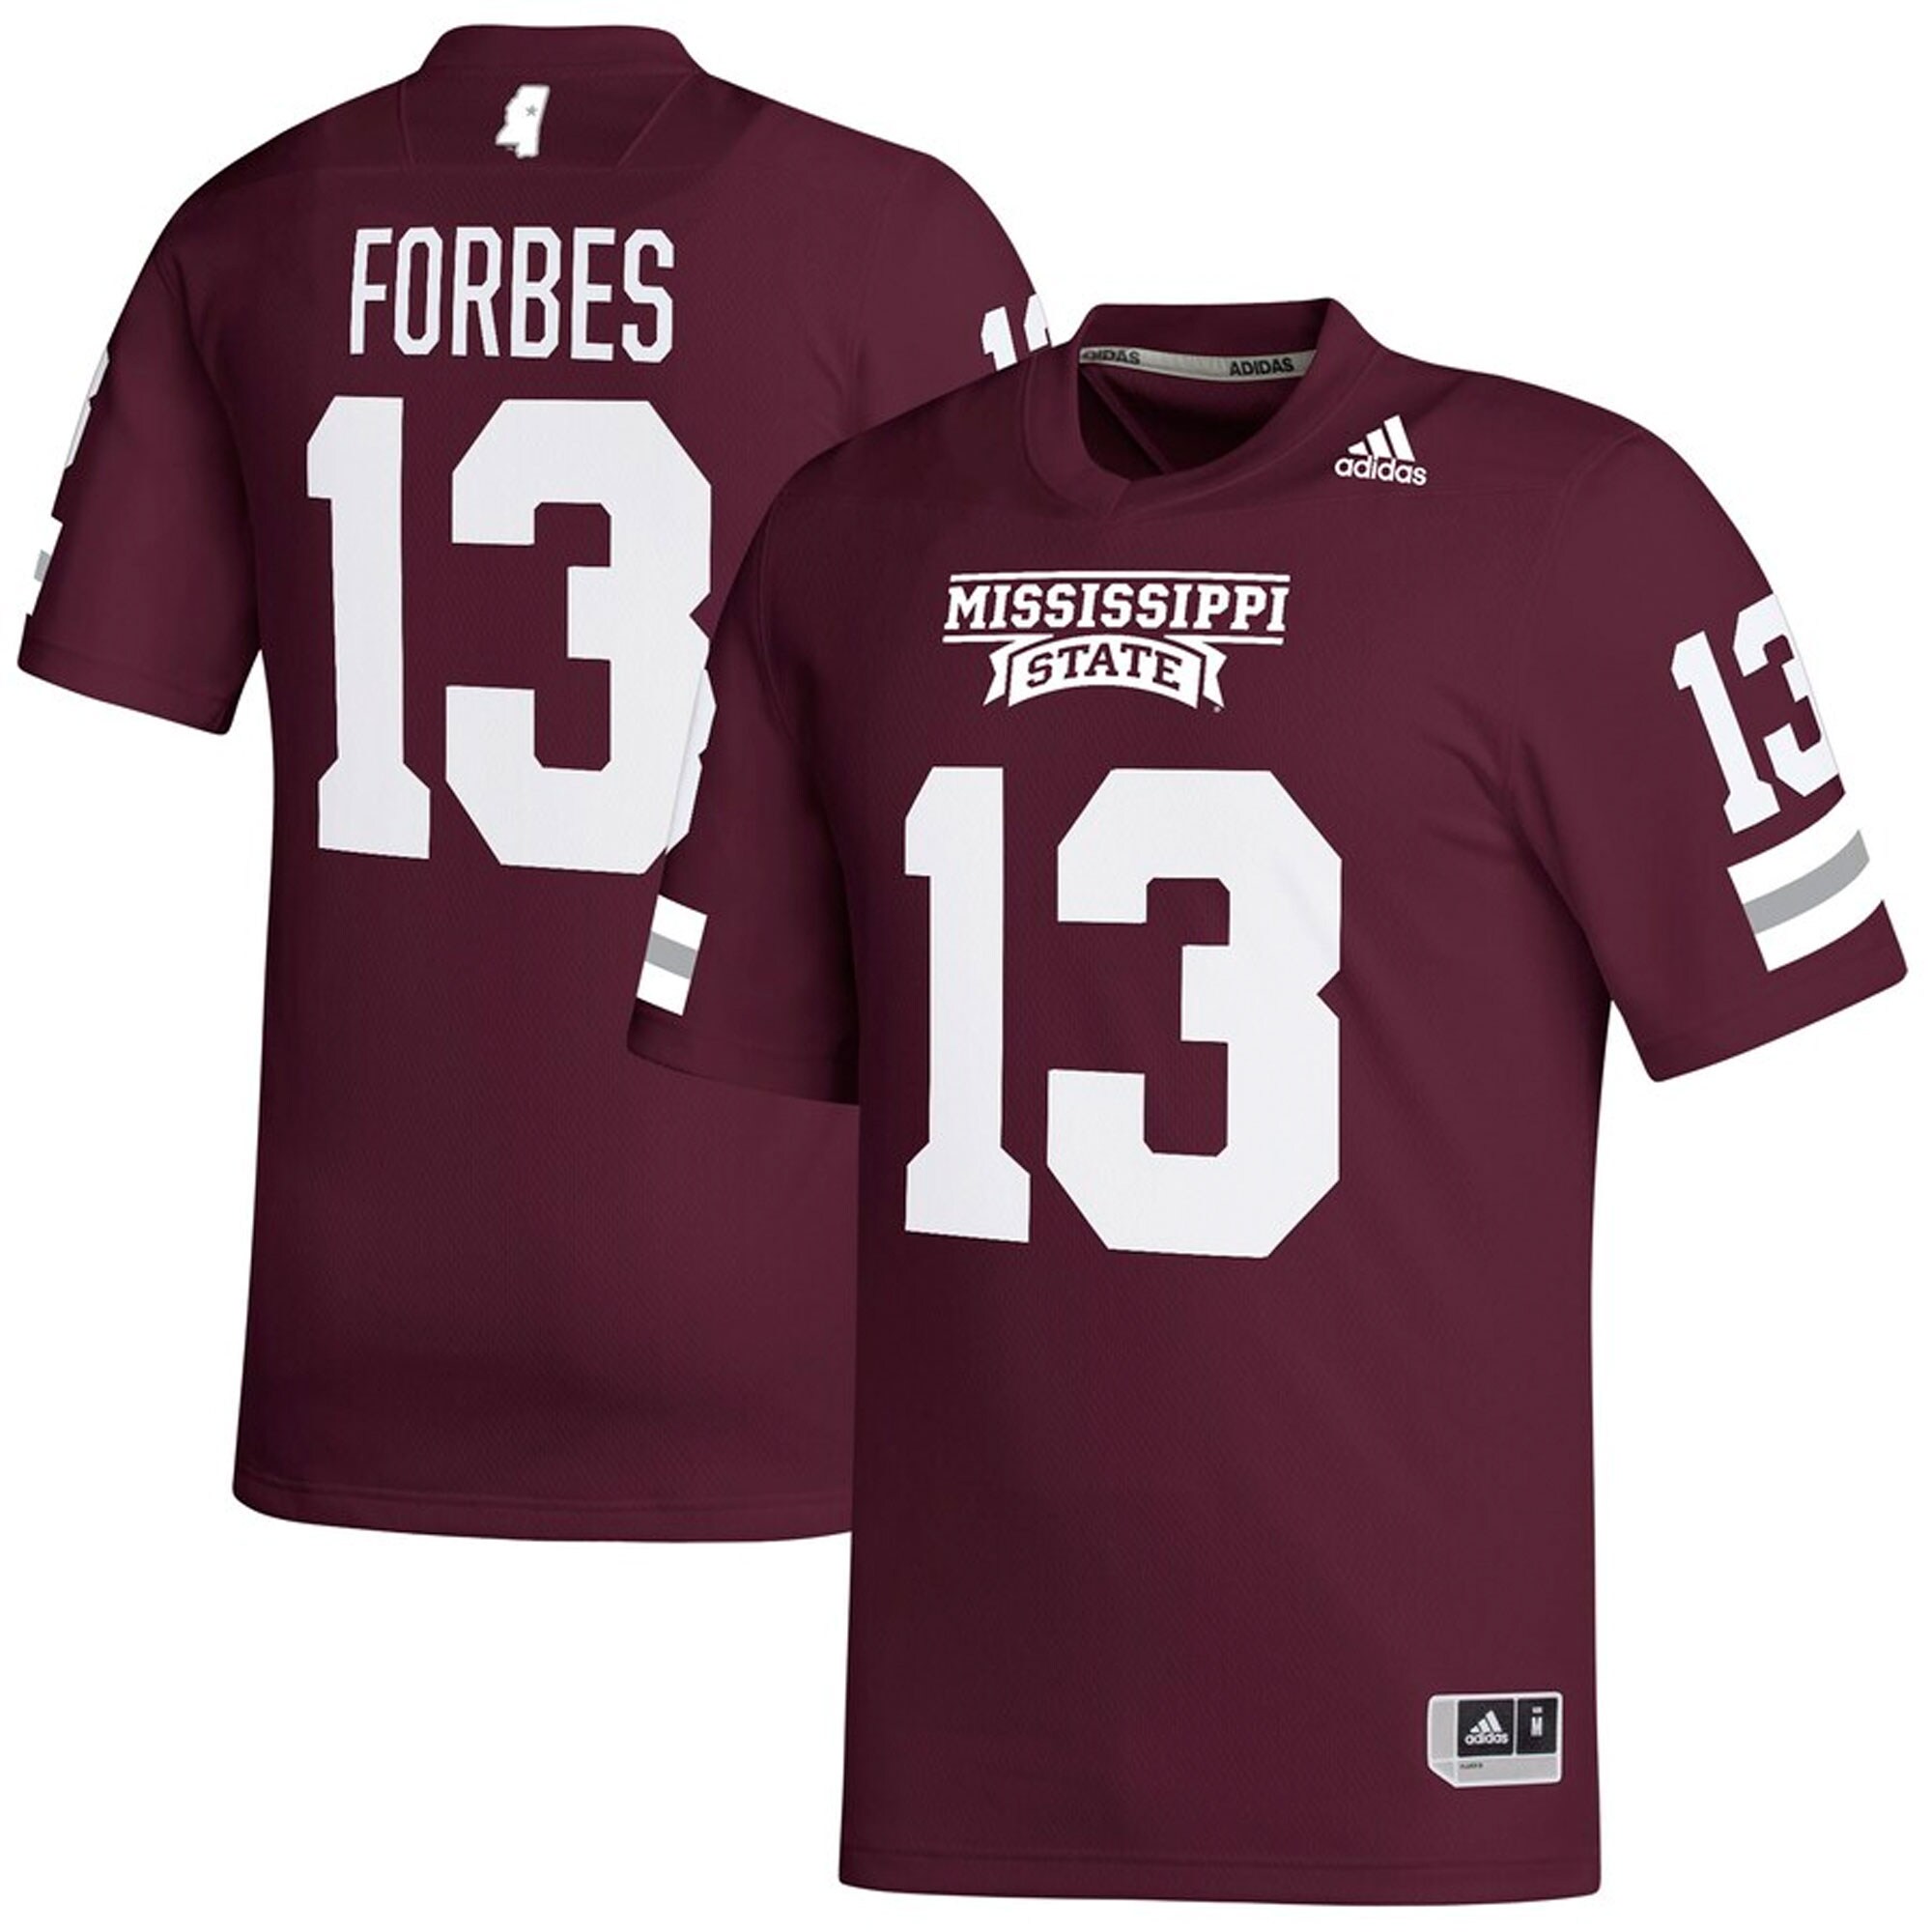 Emmanuel Forbes Mississippi State Bulldogs   Nil Replica  Football Shirts Jersey - Maroon For Youth Women Men